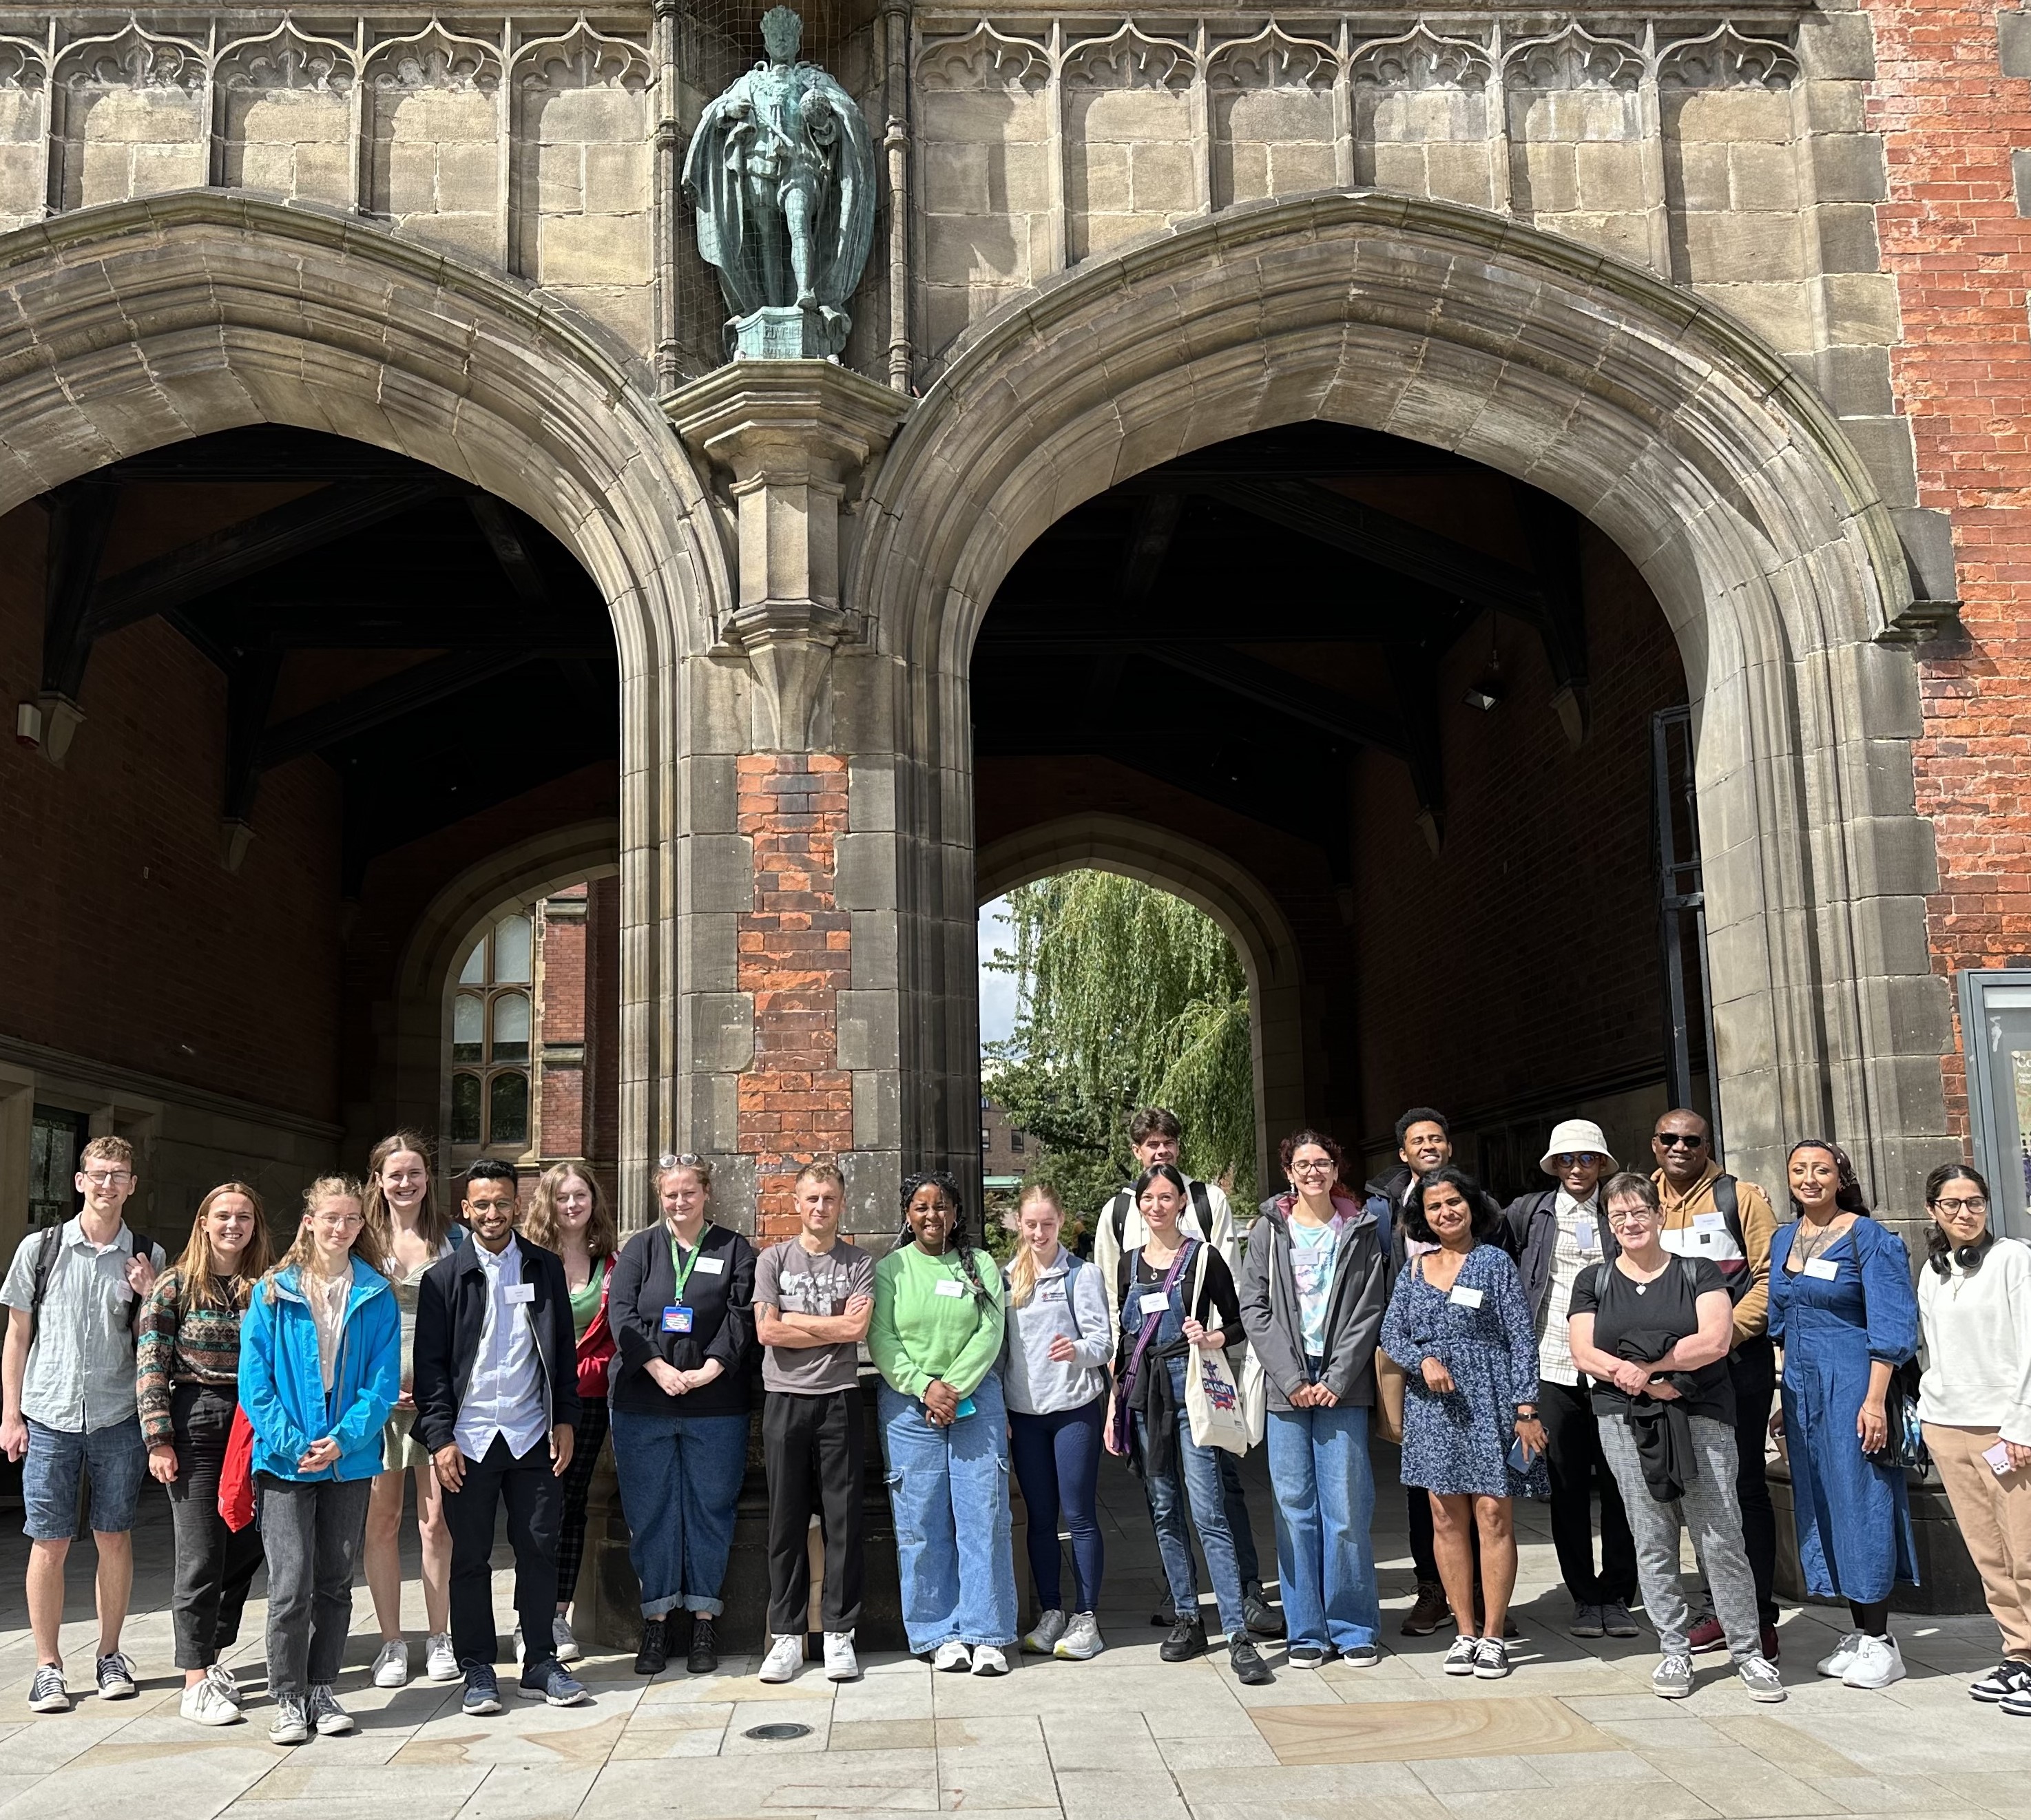 Participants standing in front of arches